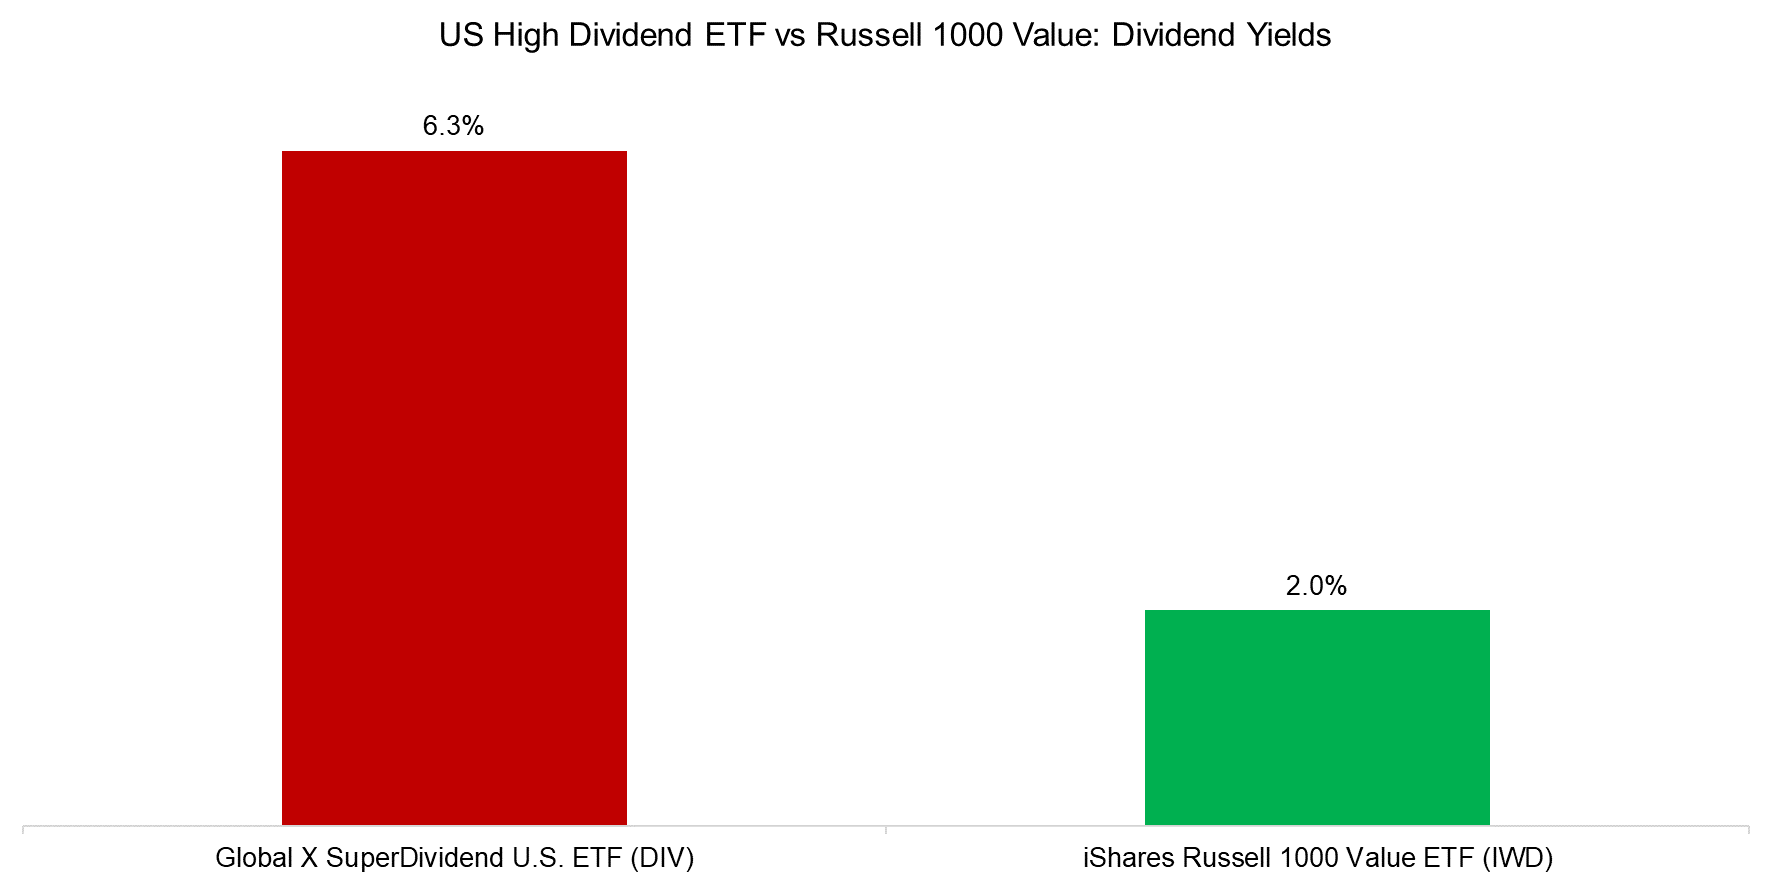 US High Dividend ETF vs Russell 1000 Value Dividend Yields